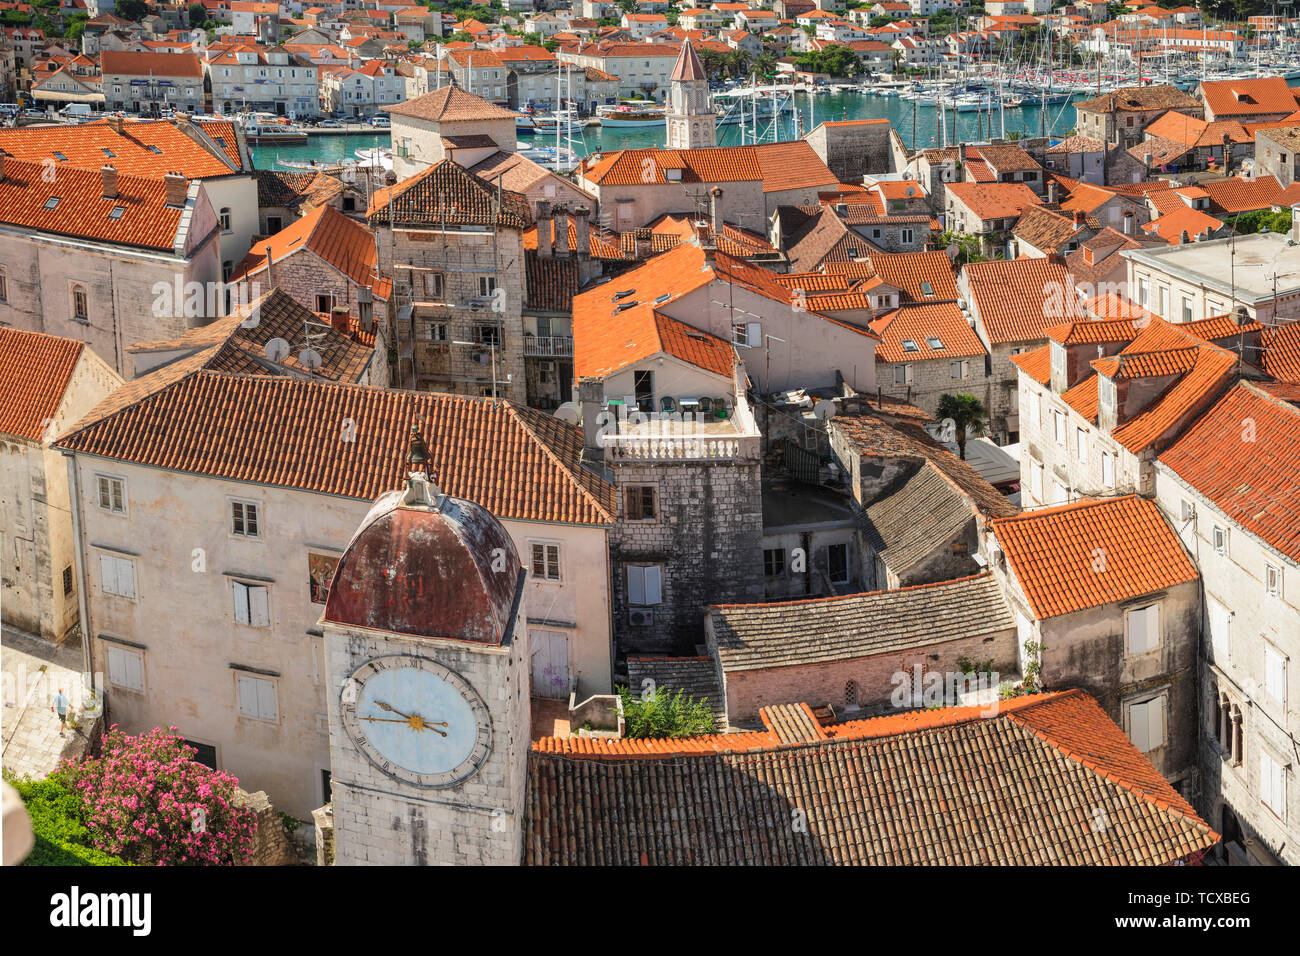 View from St. Laurentius Cathedral across the Old Town, Trogir, UNESCO World Heritage Site, Dalmatia, Croatia, Europe Stock Photo